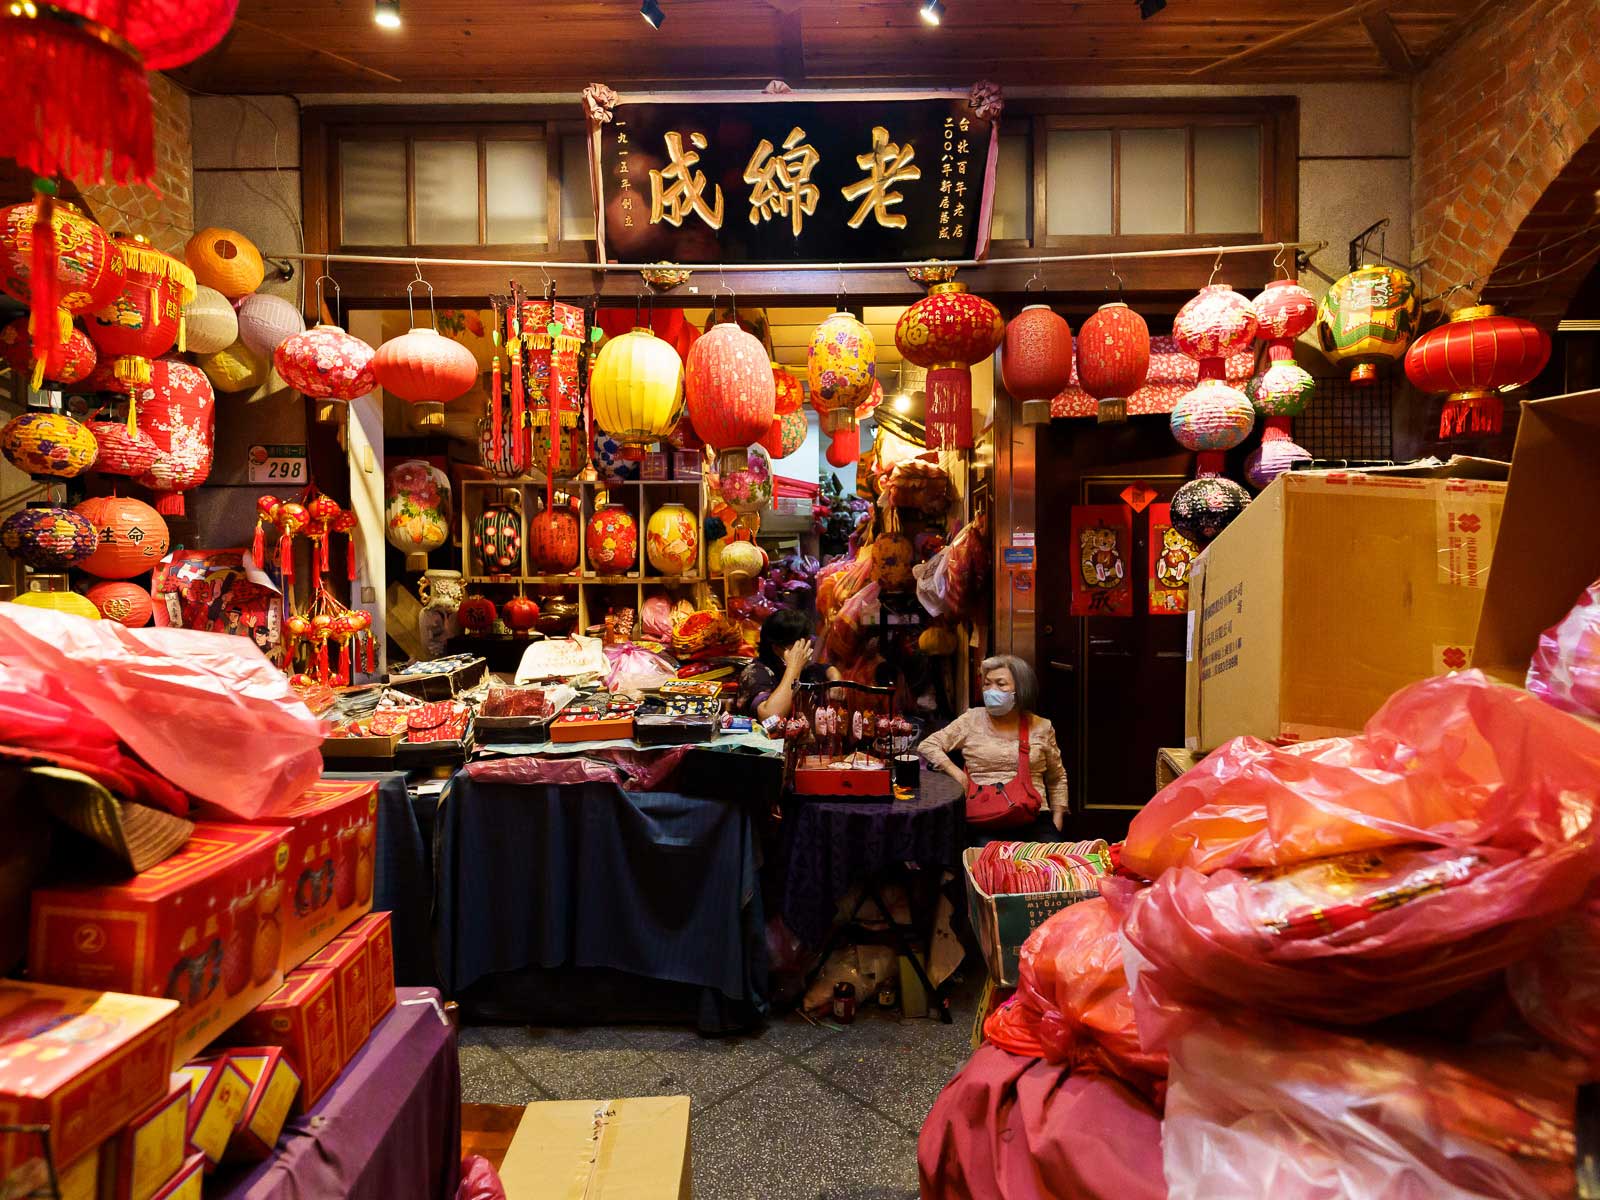 The walls of a storefront are decorated with red paper lanterns and boxes of Luner New Year's goods are piled around the room ready to be sold.